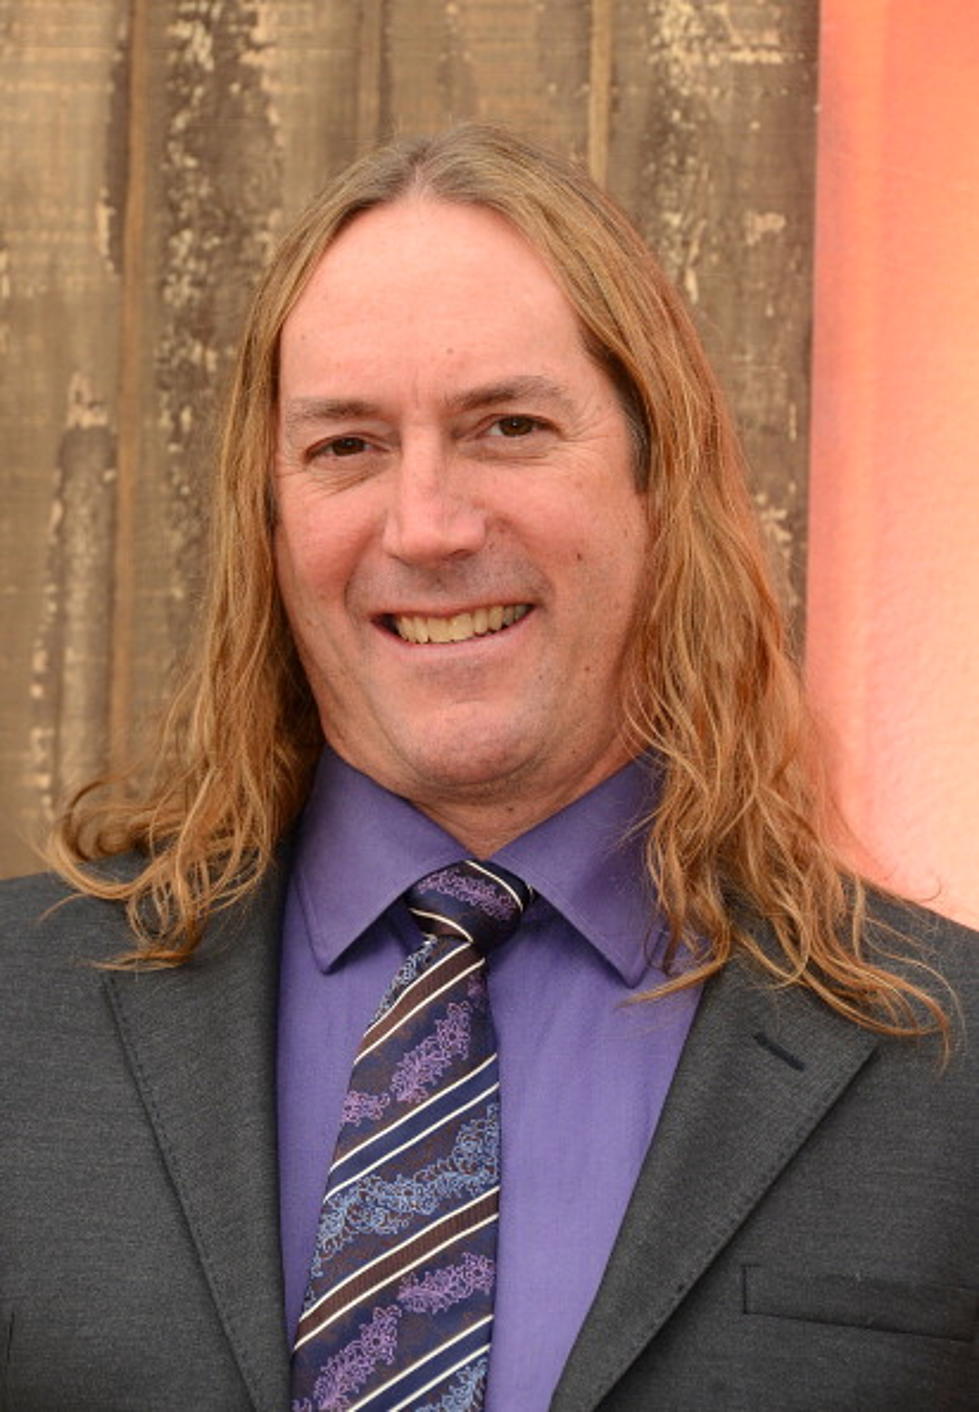 Tool’s Danny Carey To Drum On ‘Late Night With Seth Meyers’